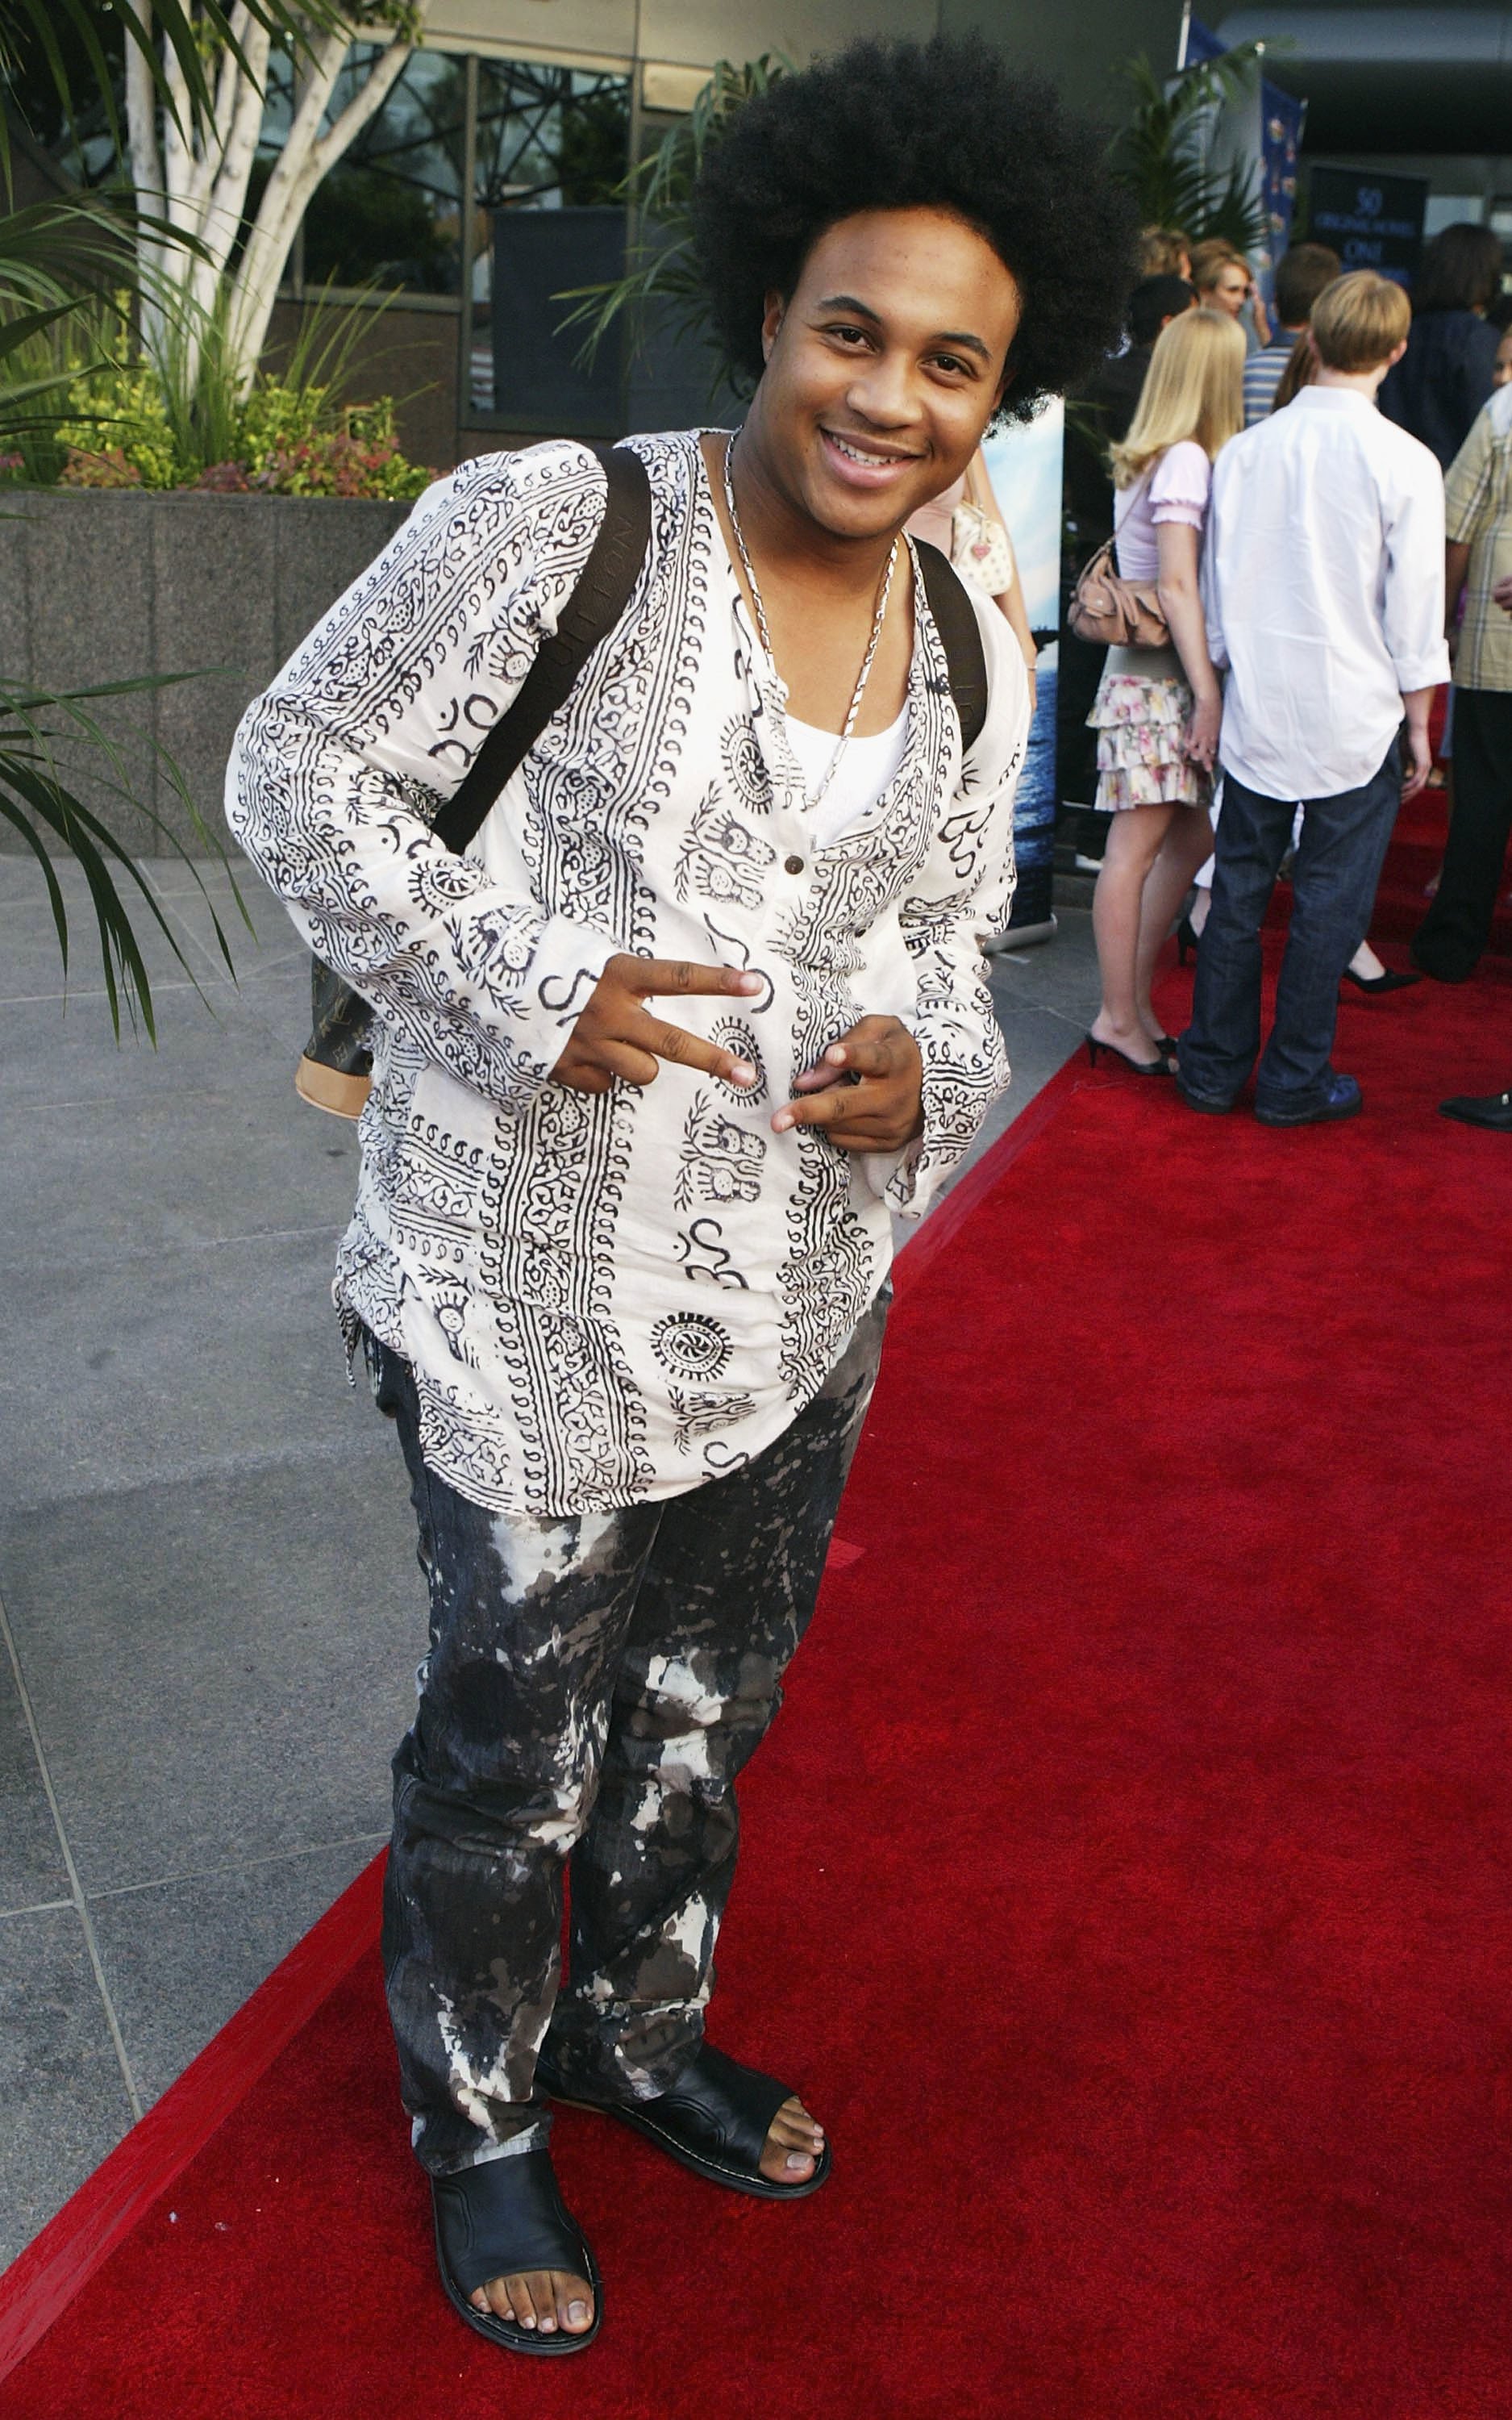 Orlando Brown at the Los Angeles premiere of "Tiger Cruise" in 2004 | Source: Getty Images